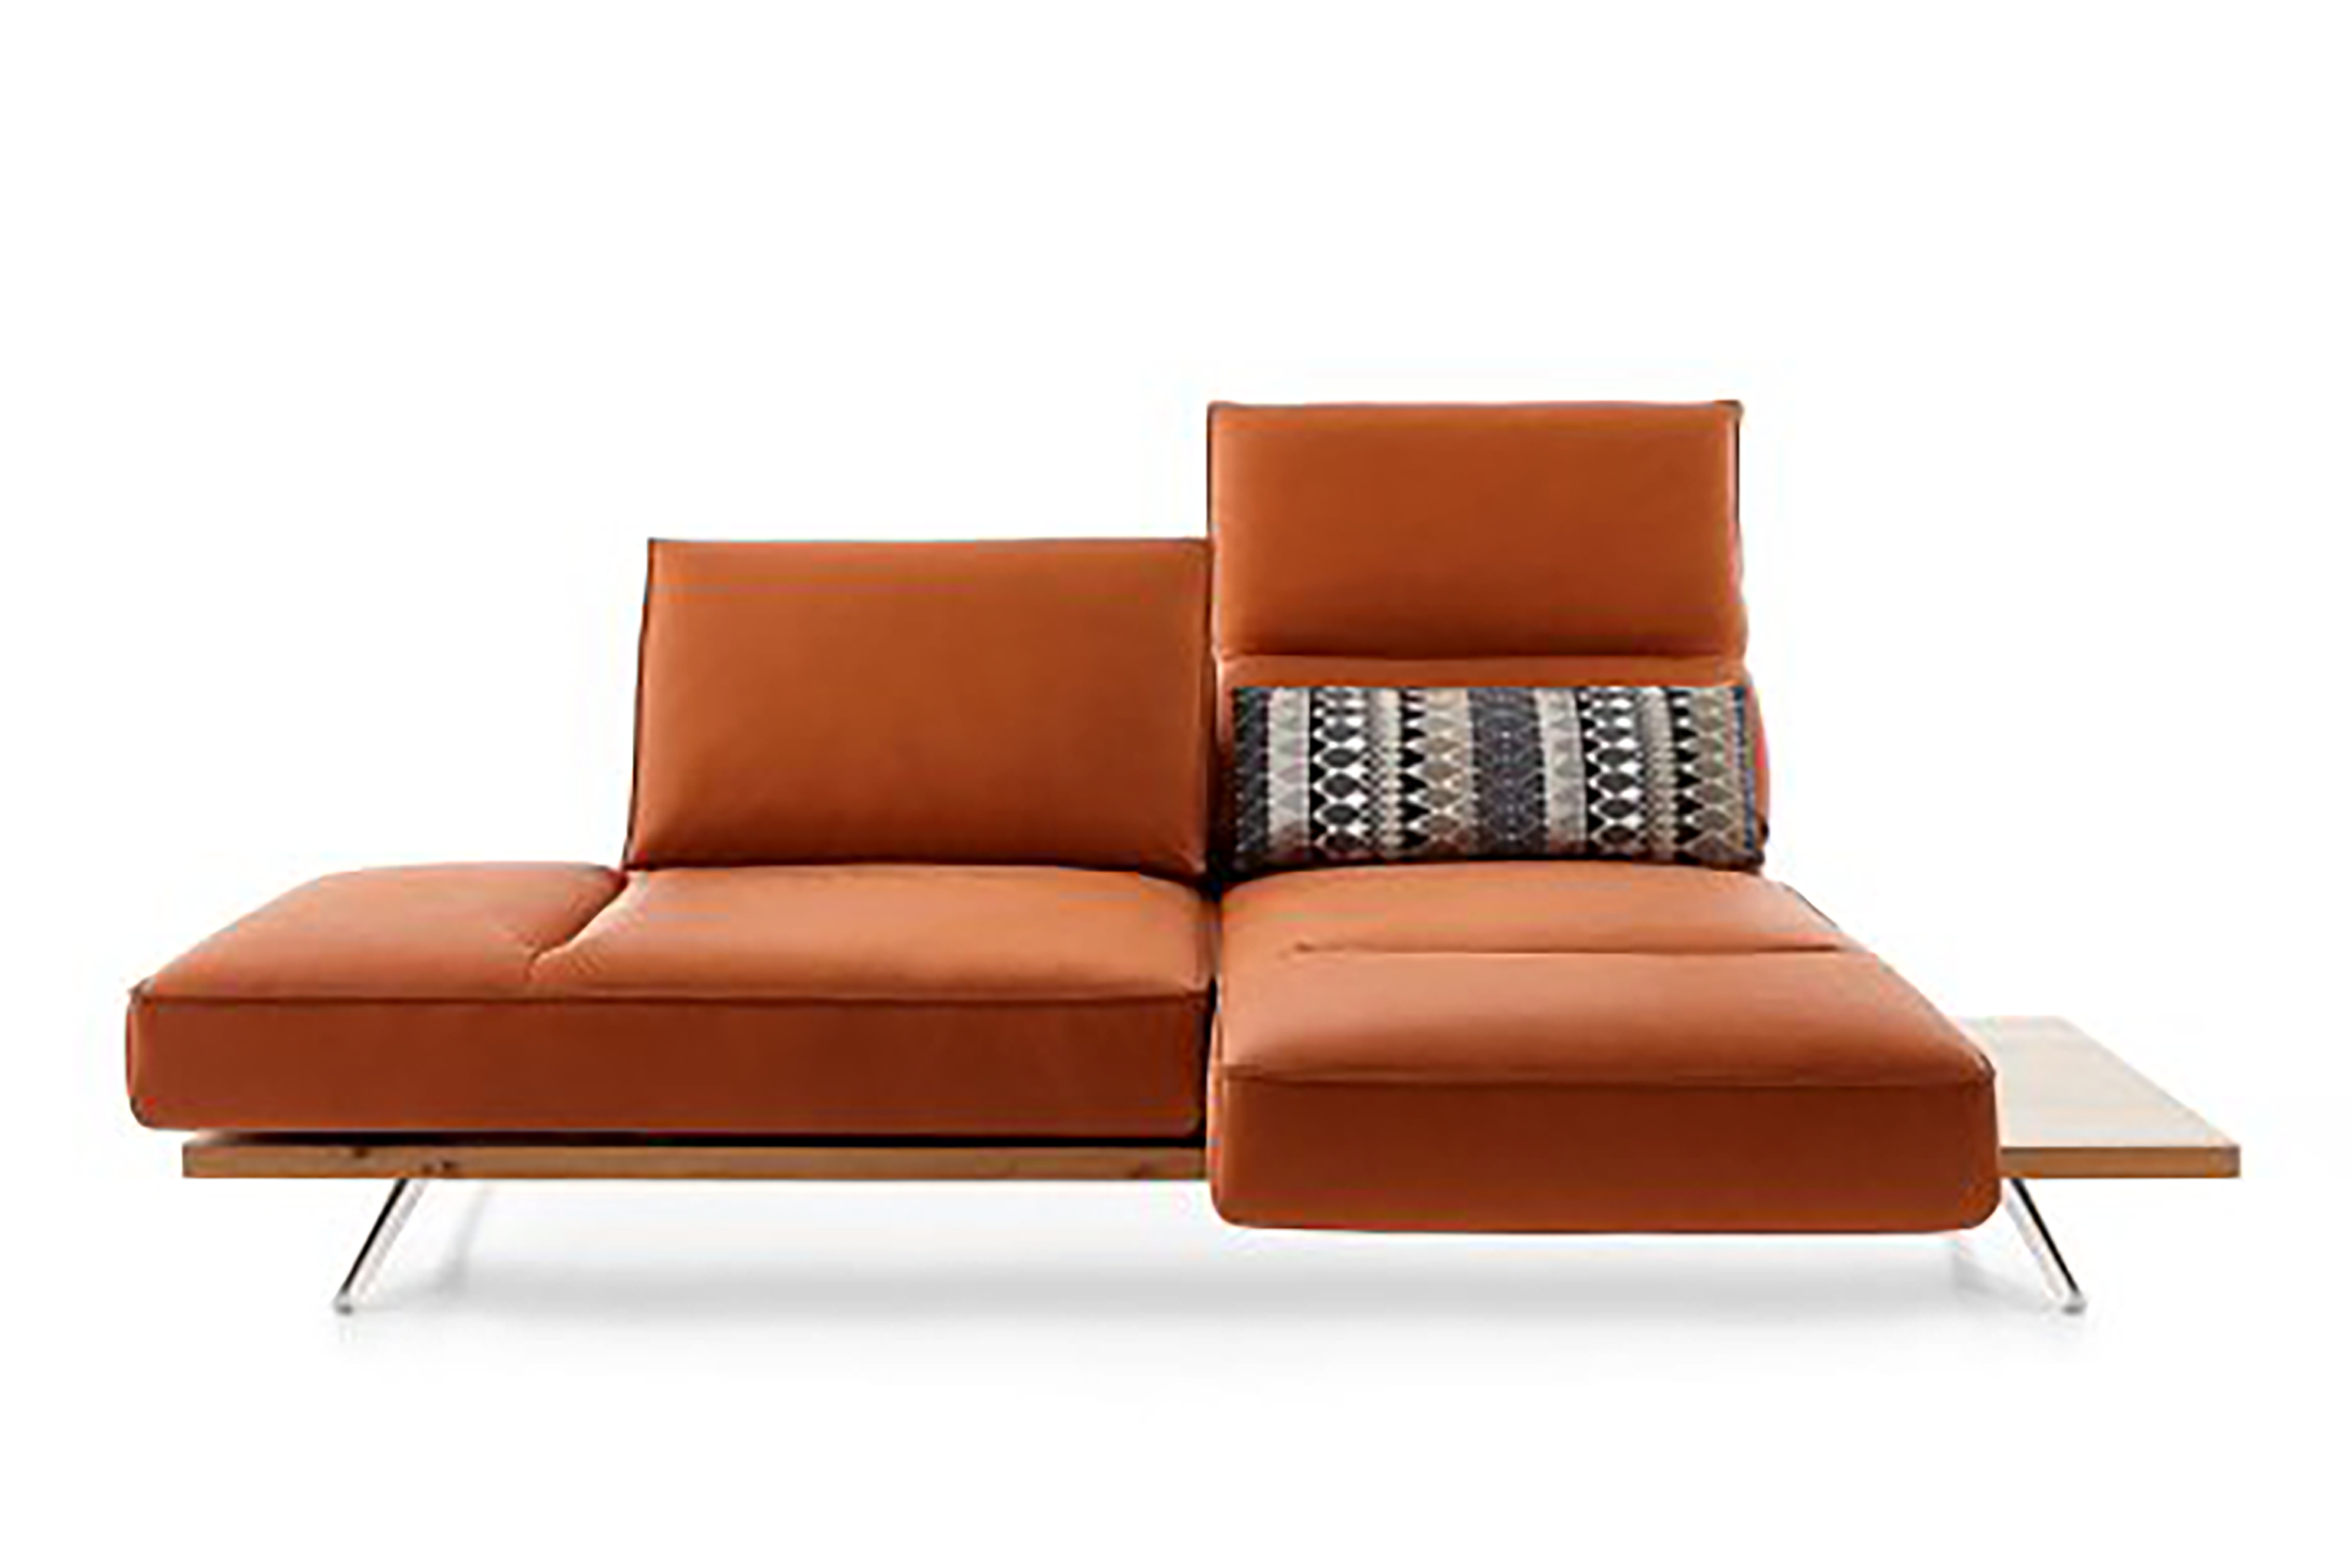 PHOENIX 2.5 Seater Sofa in Leather by Koinor